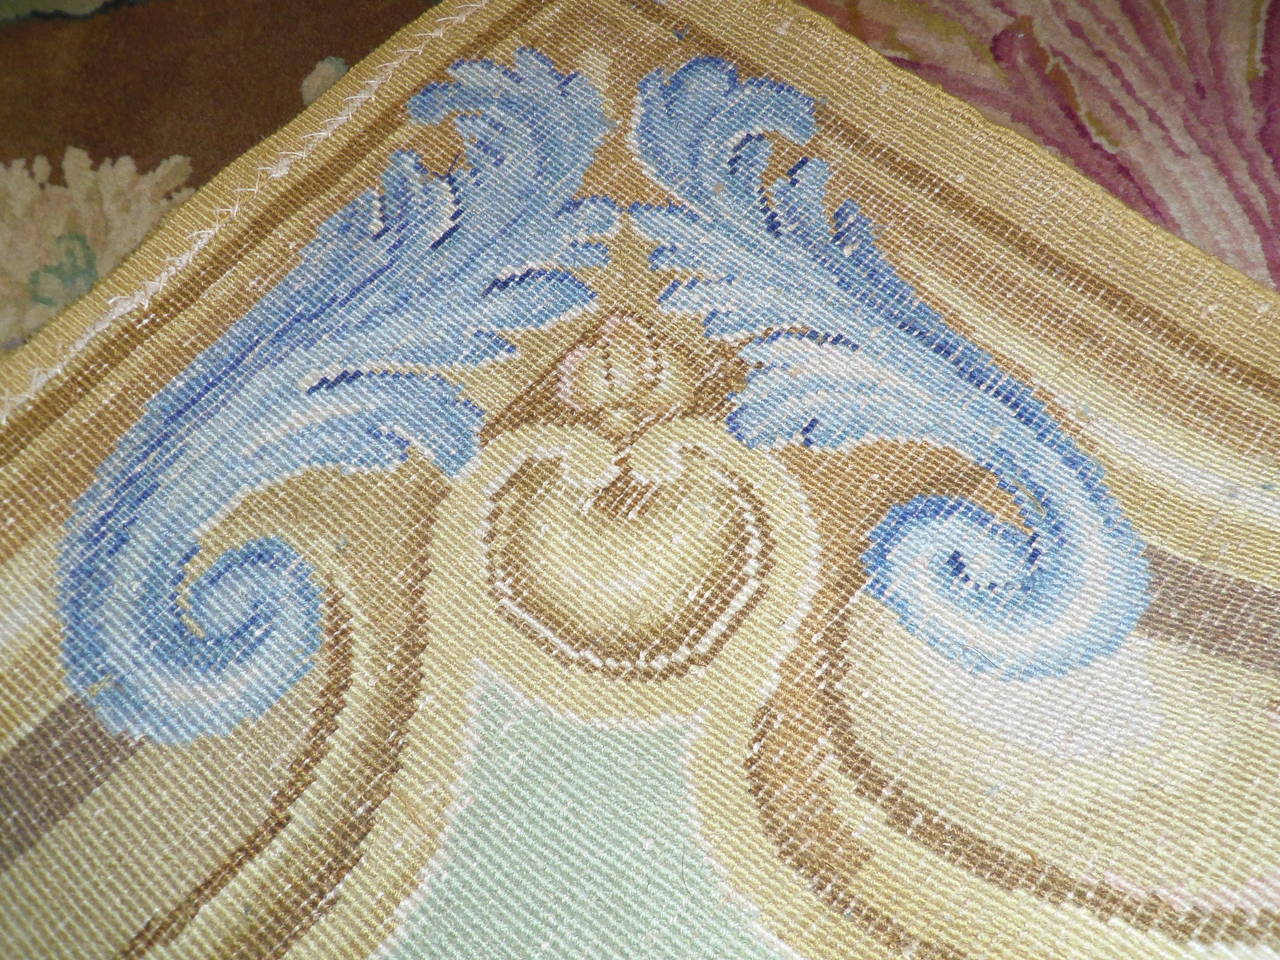 20th Century French Savonnerie Carpet from Manufactory of Hamot, Paris, circa 1900 For Sale